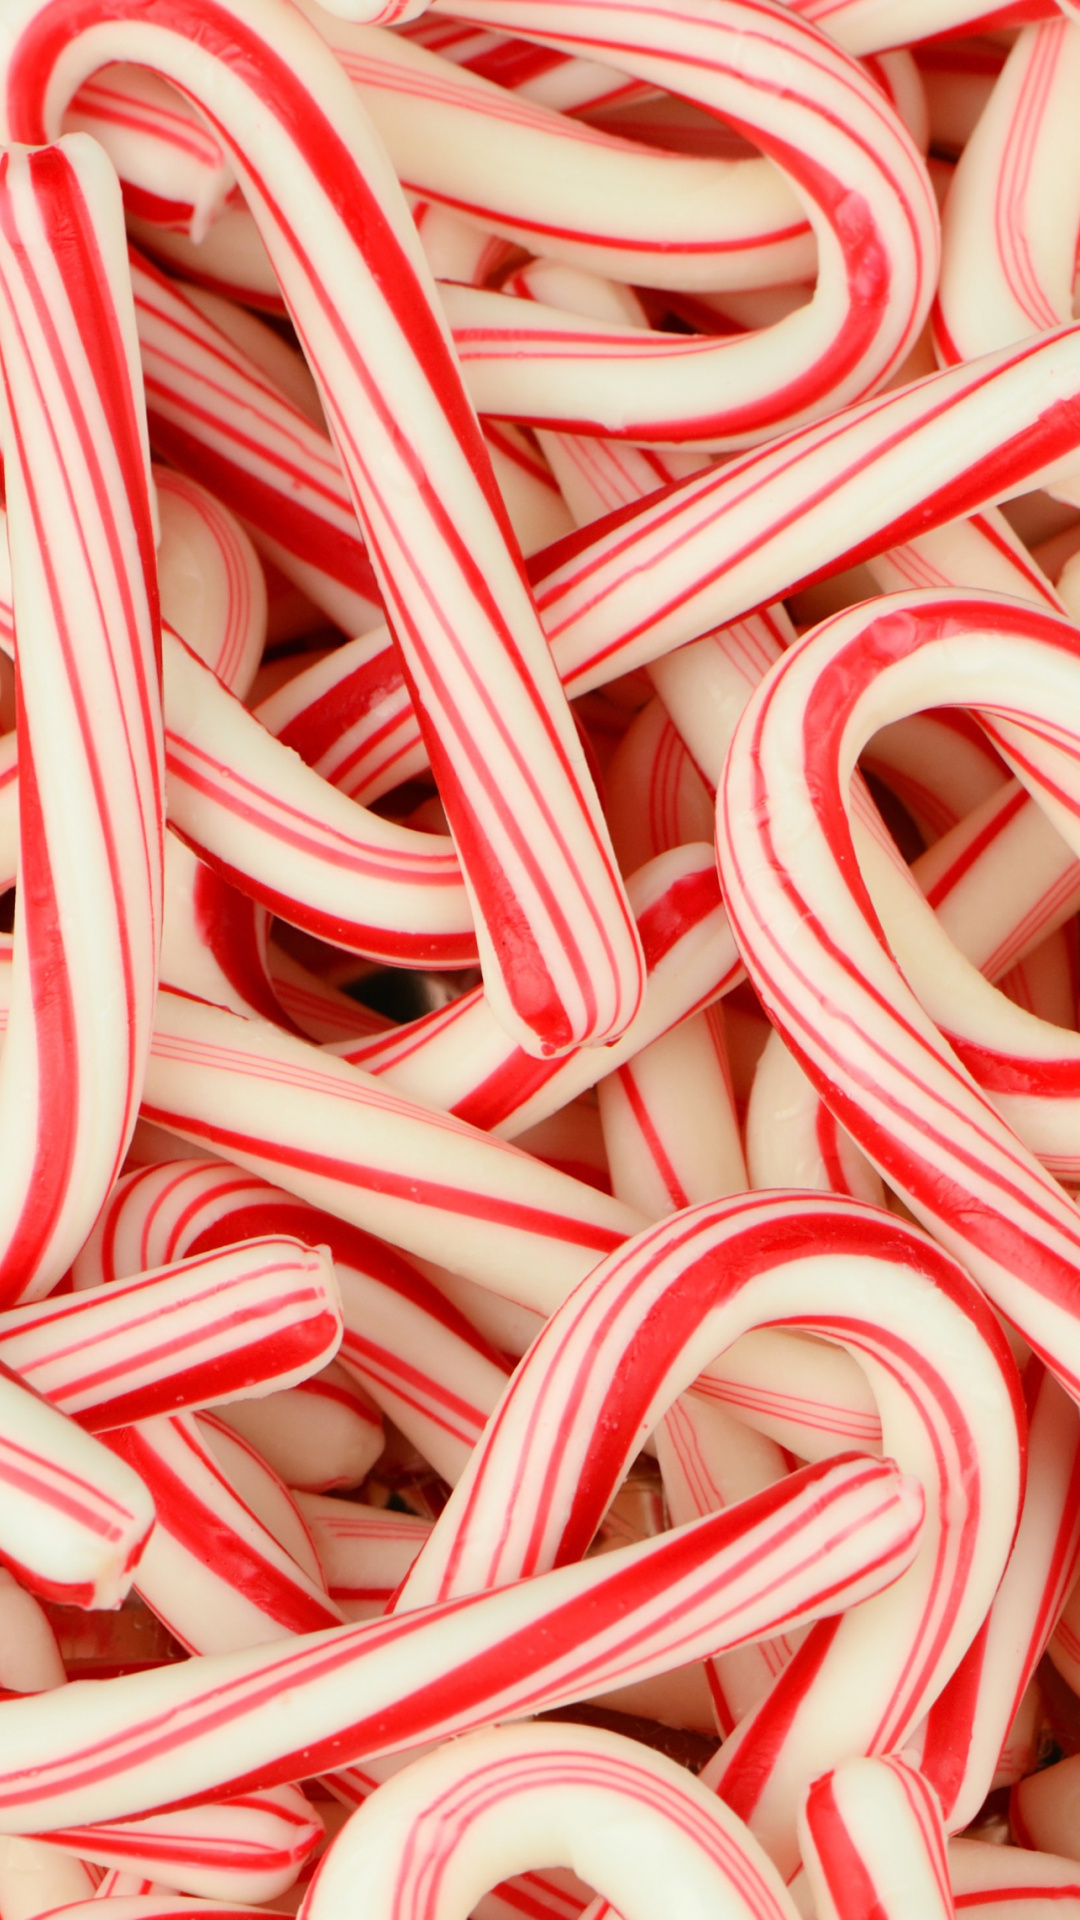 Colorful candy canes, Tasty holiday treat, Sweet peppermint delight, Festive decoration, 1080x1920 Full HD Phone